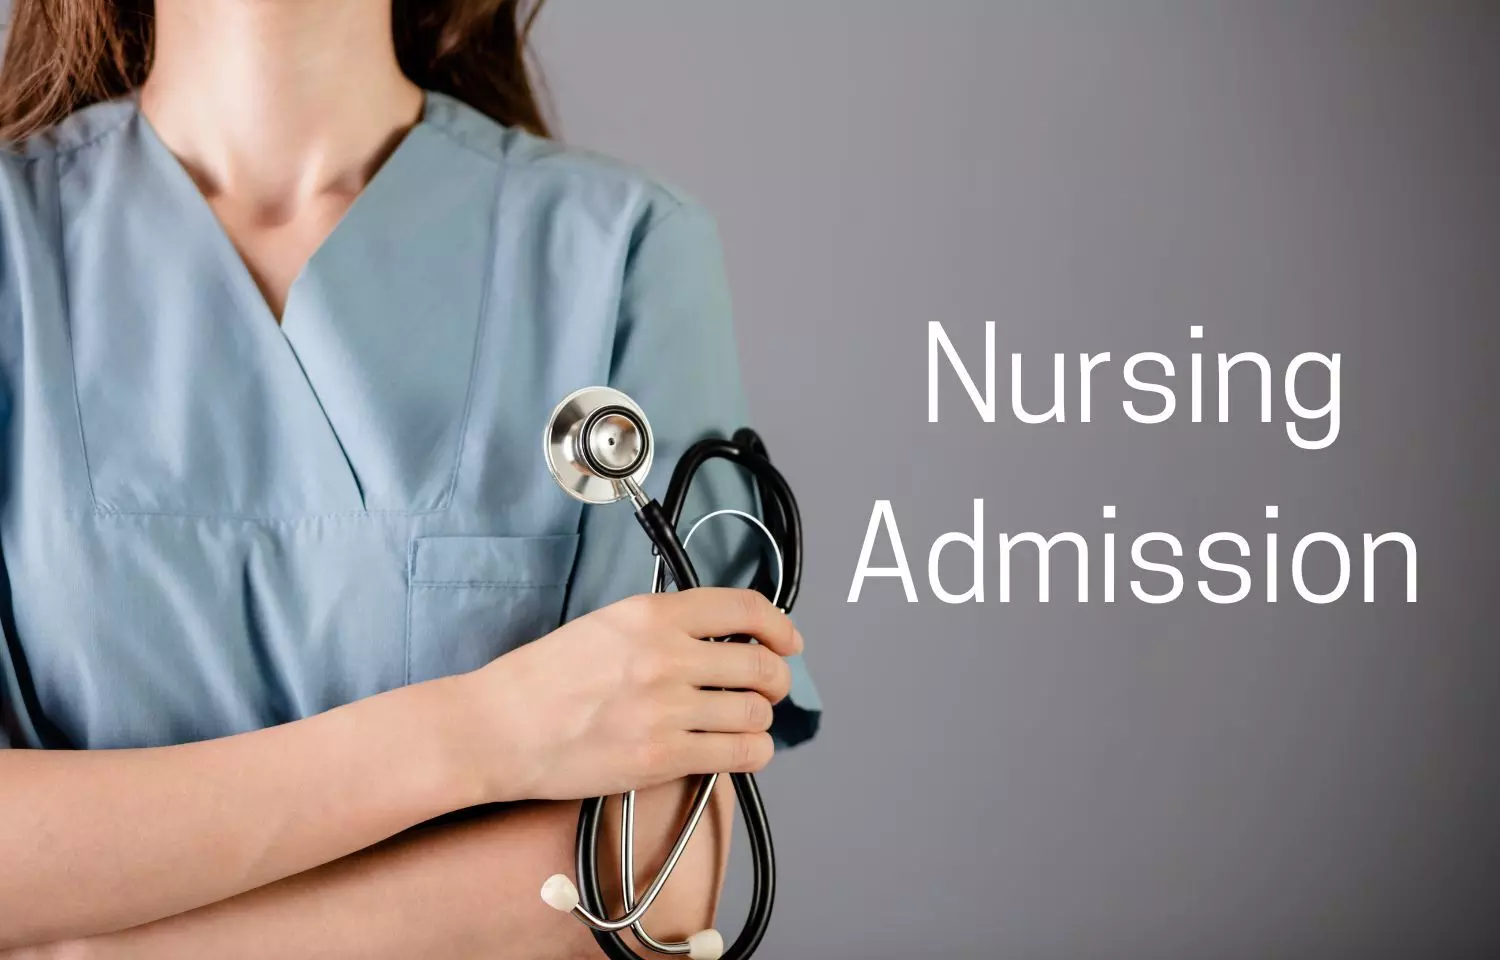 DHS Meghalaya Invites Applications For General Nursing and Midwifery course, Apply by July 29, Details